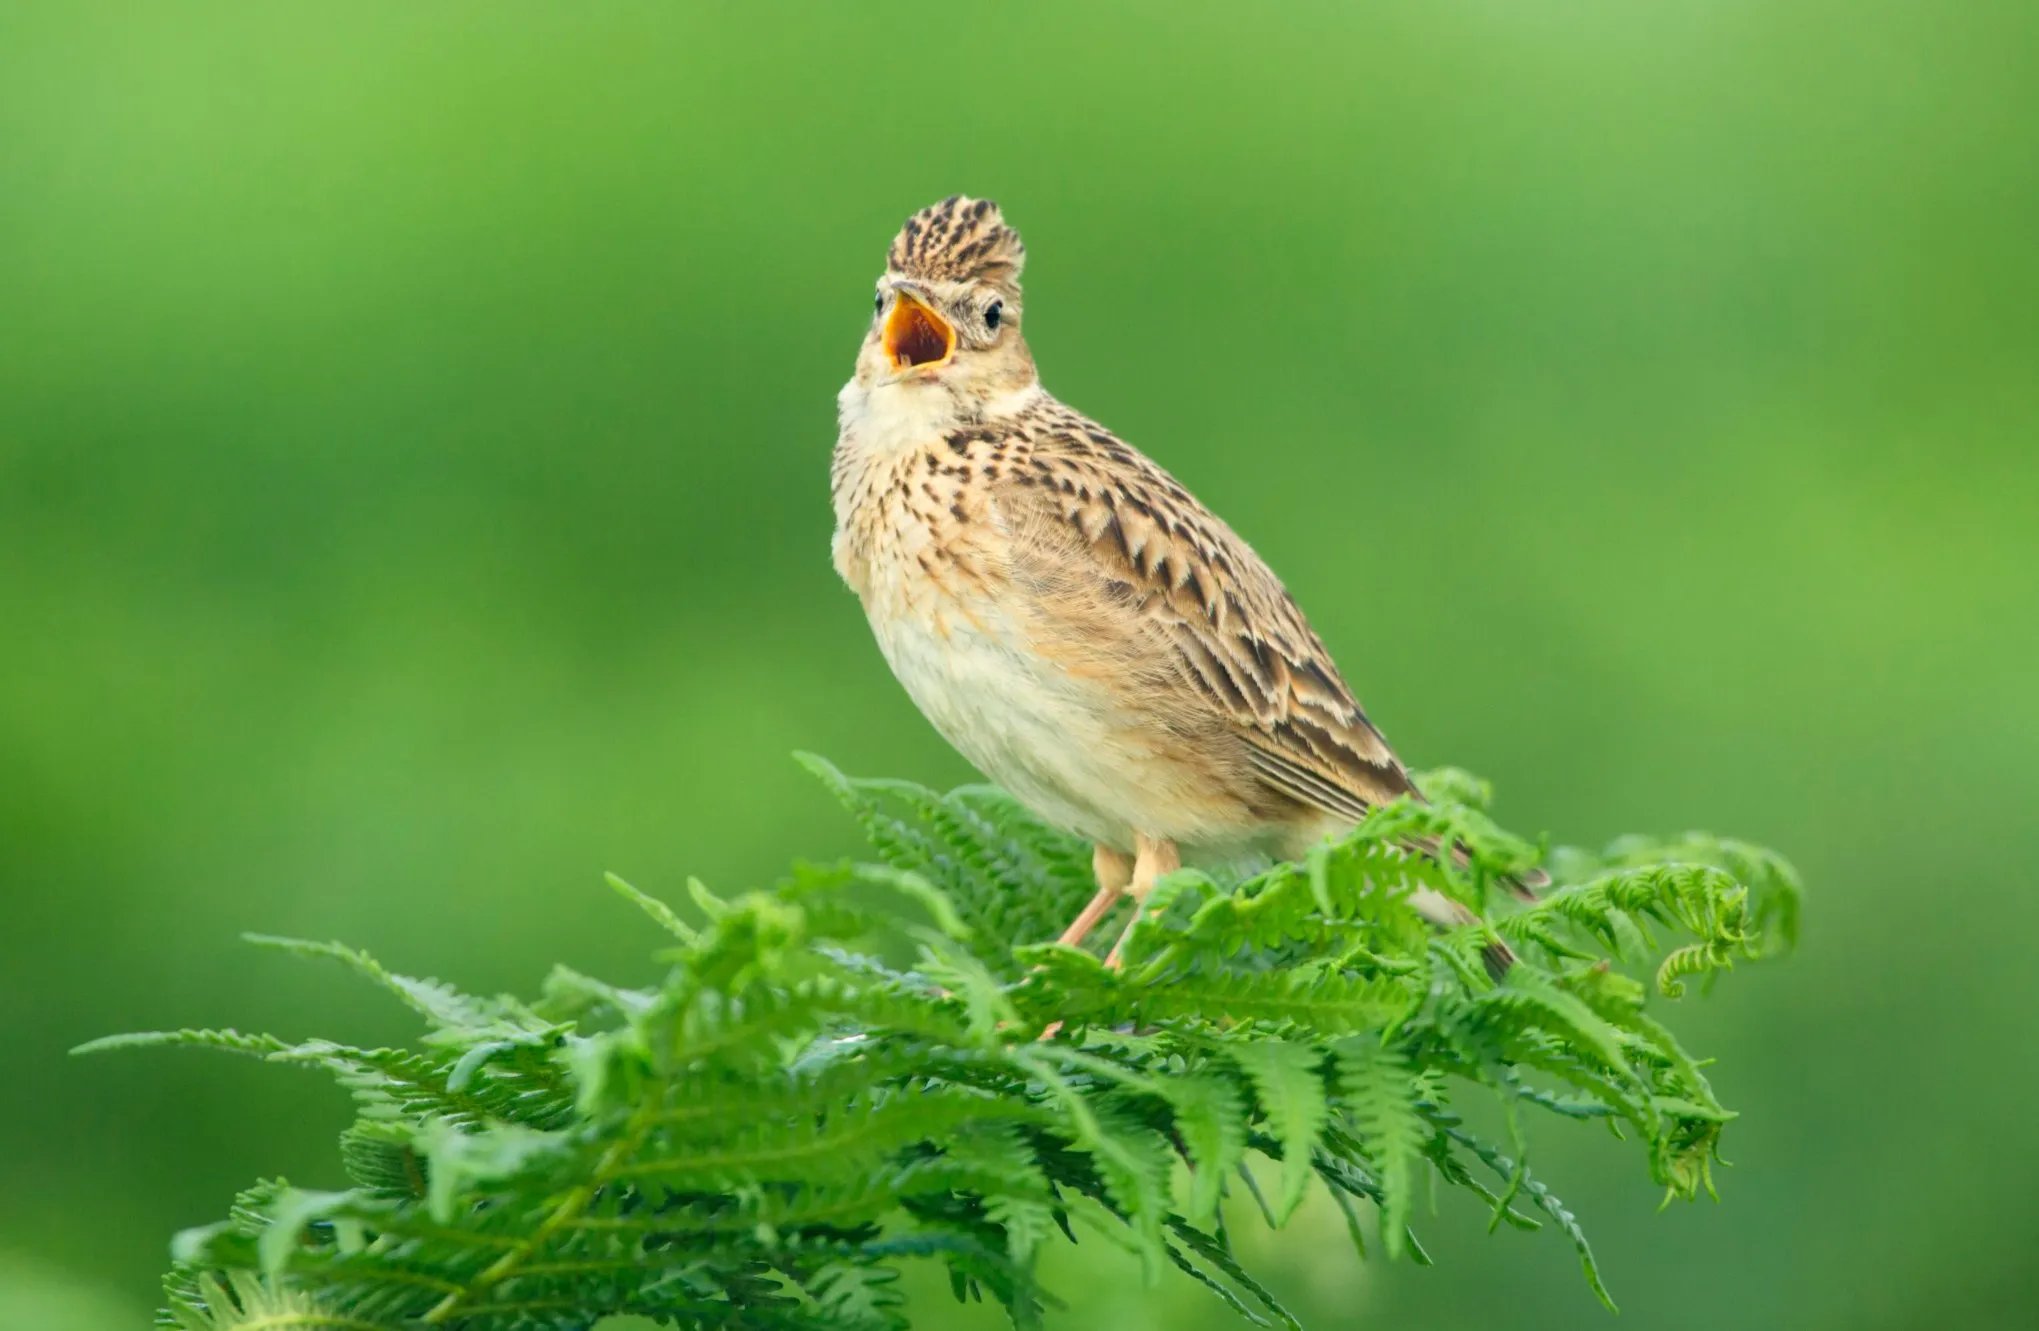 A Skylark in full song, perched on top of foliage. 